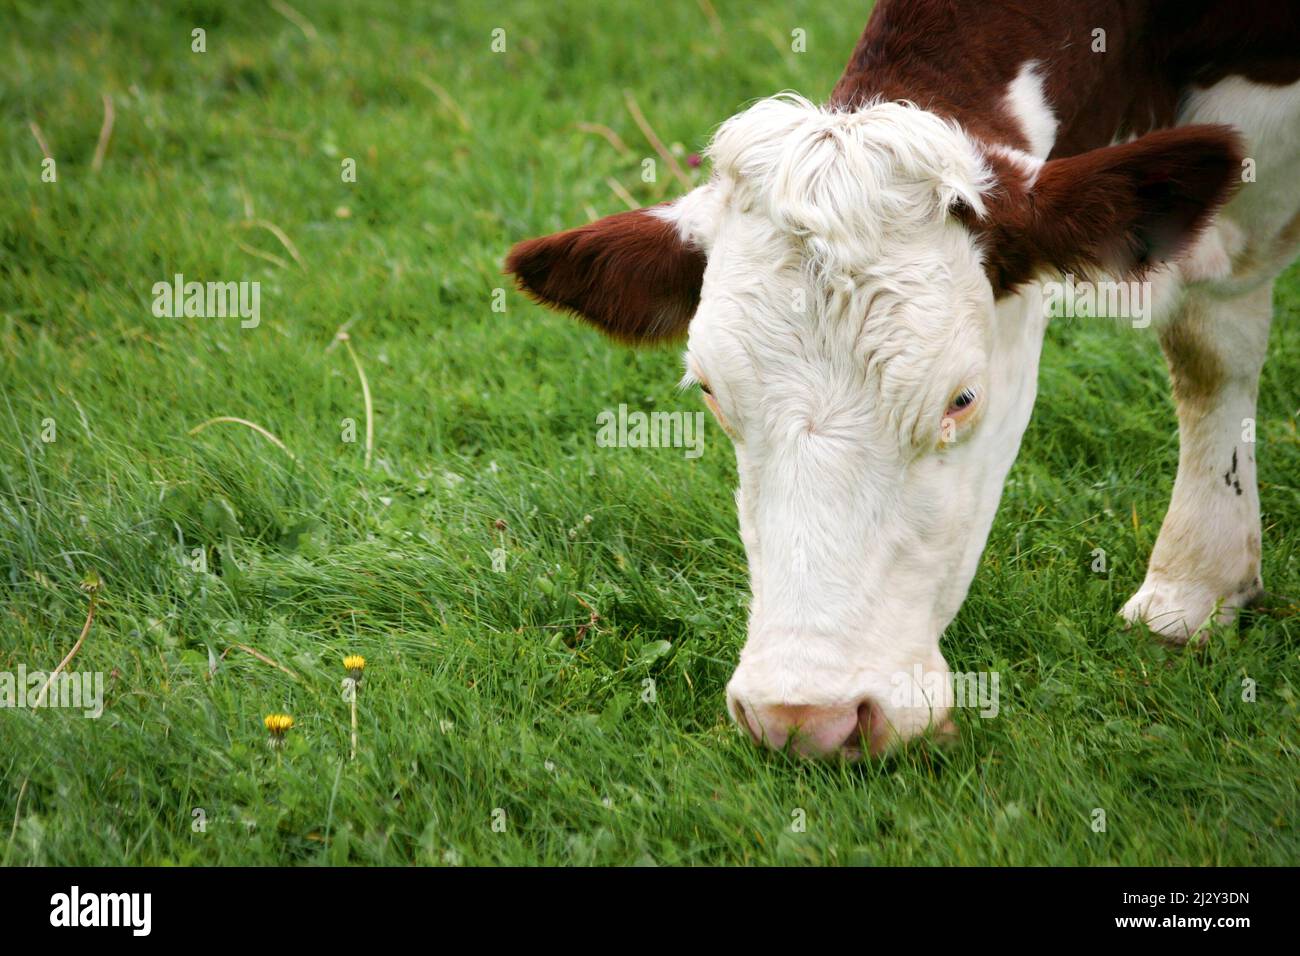 Cows grazing. A tranquil rural scene as dairy cows feed on fresh grass growing in a paddock. Stock Photo